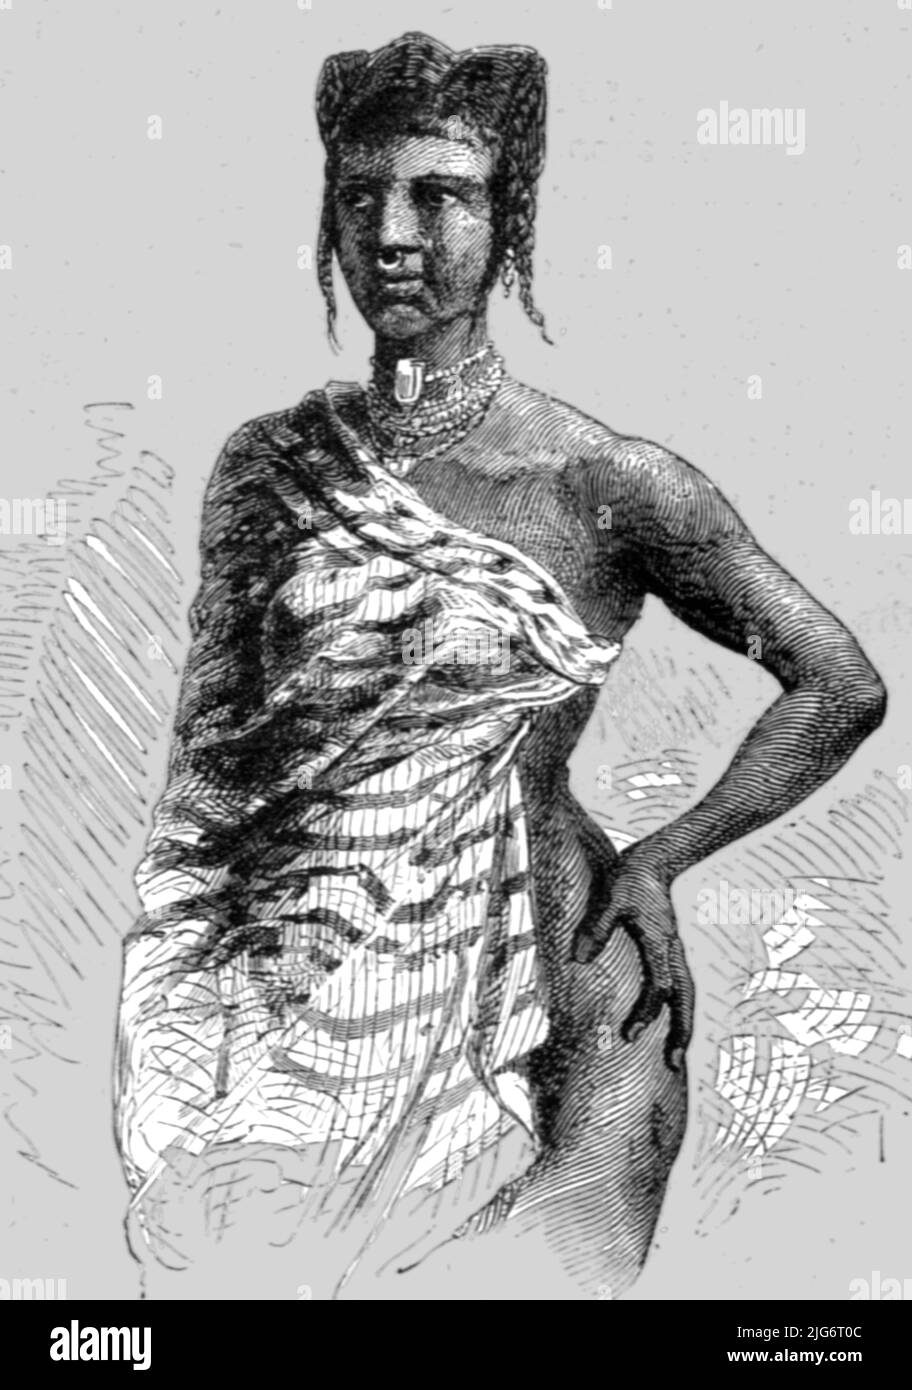 'A Mahe Woman of Ampasim; An Excursion in Dahomey', 1871. [Woman from what is now Benin in West Africa]. From, 'Illustrated Travels' by H.W. Bates. [Cassell, Petter, and Galpin, c1880, London] Belle Sauvage Works.London E.C. Stock Photo